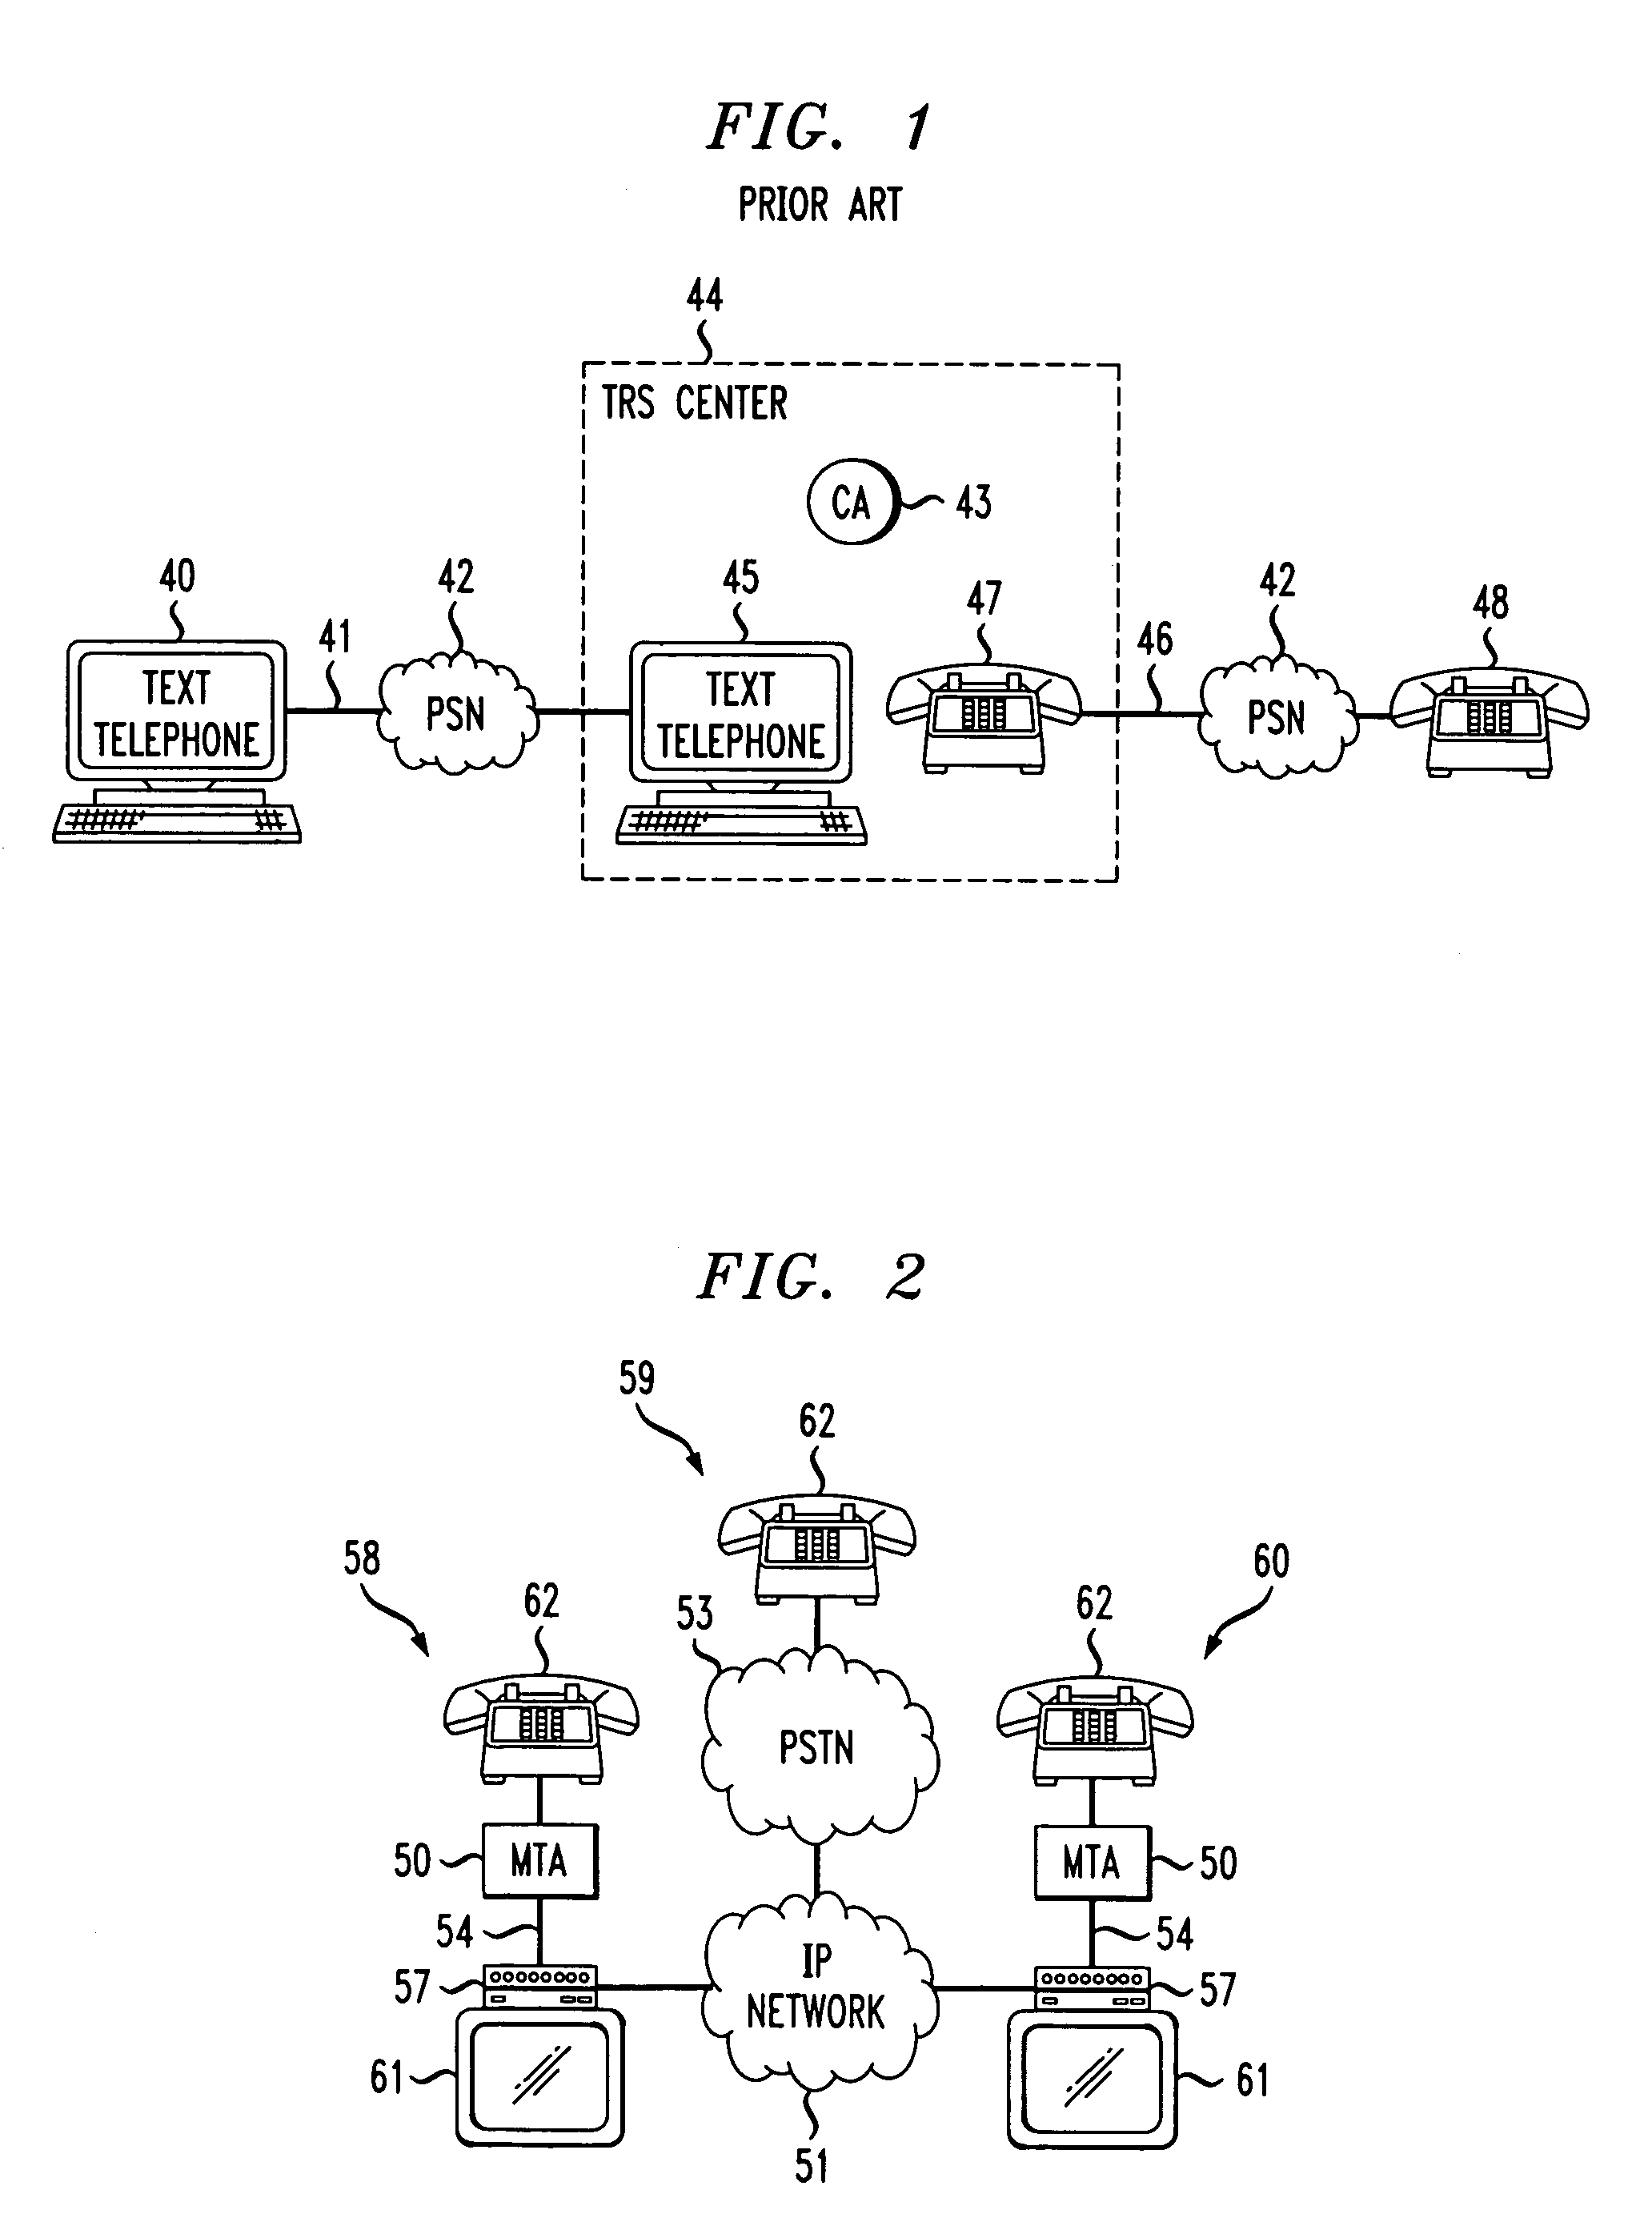 Method and device for providing speech-to-text encoding and telephony service